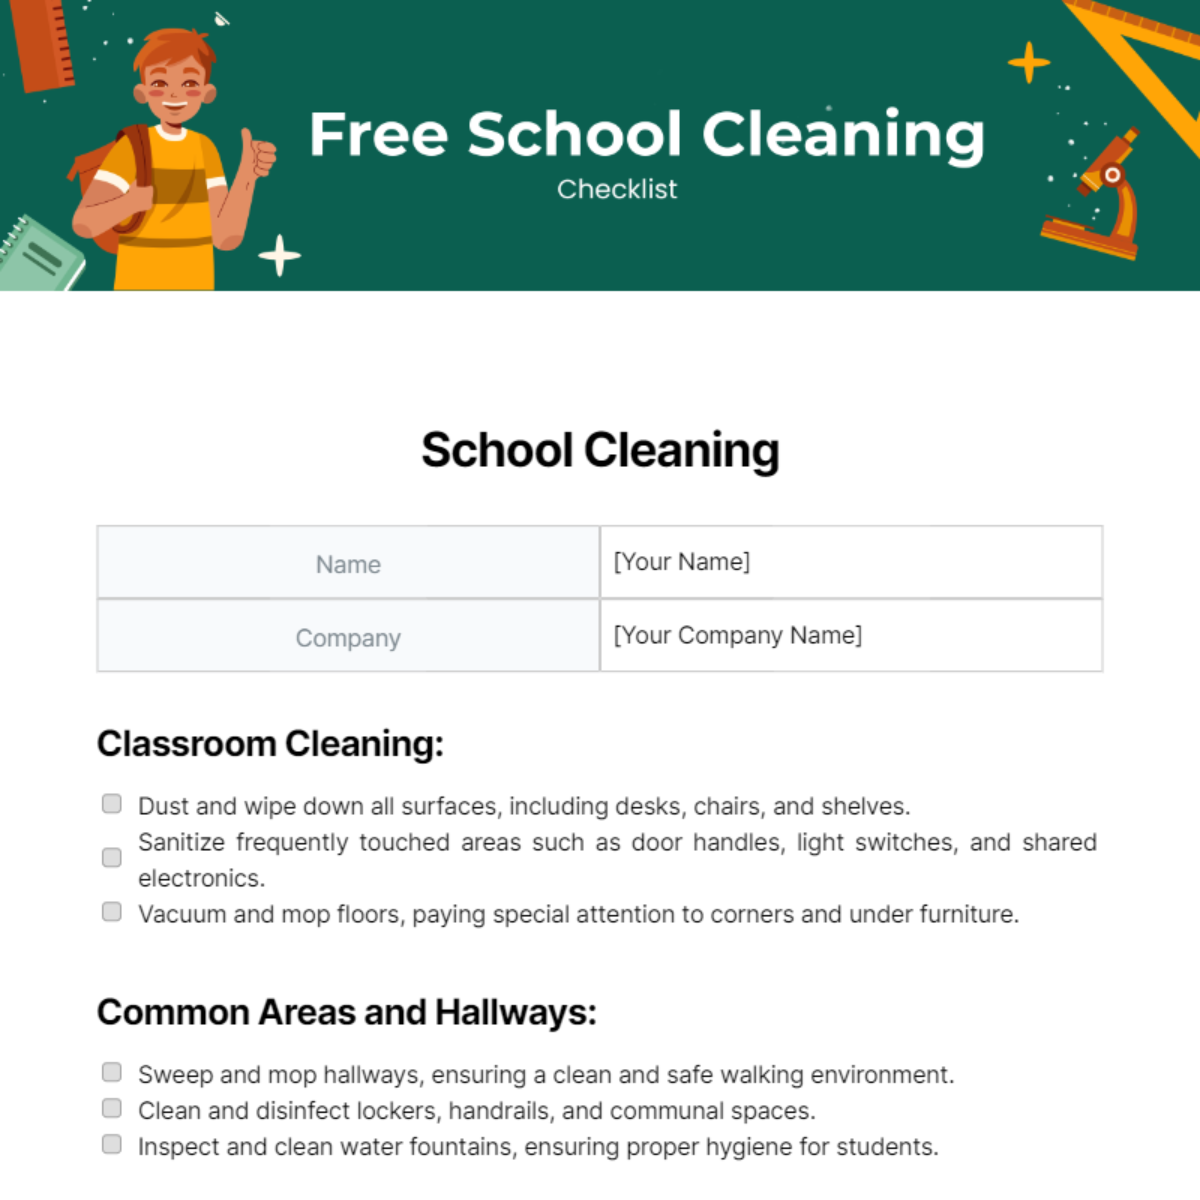 School Cleaning Checklist Template